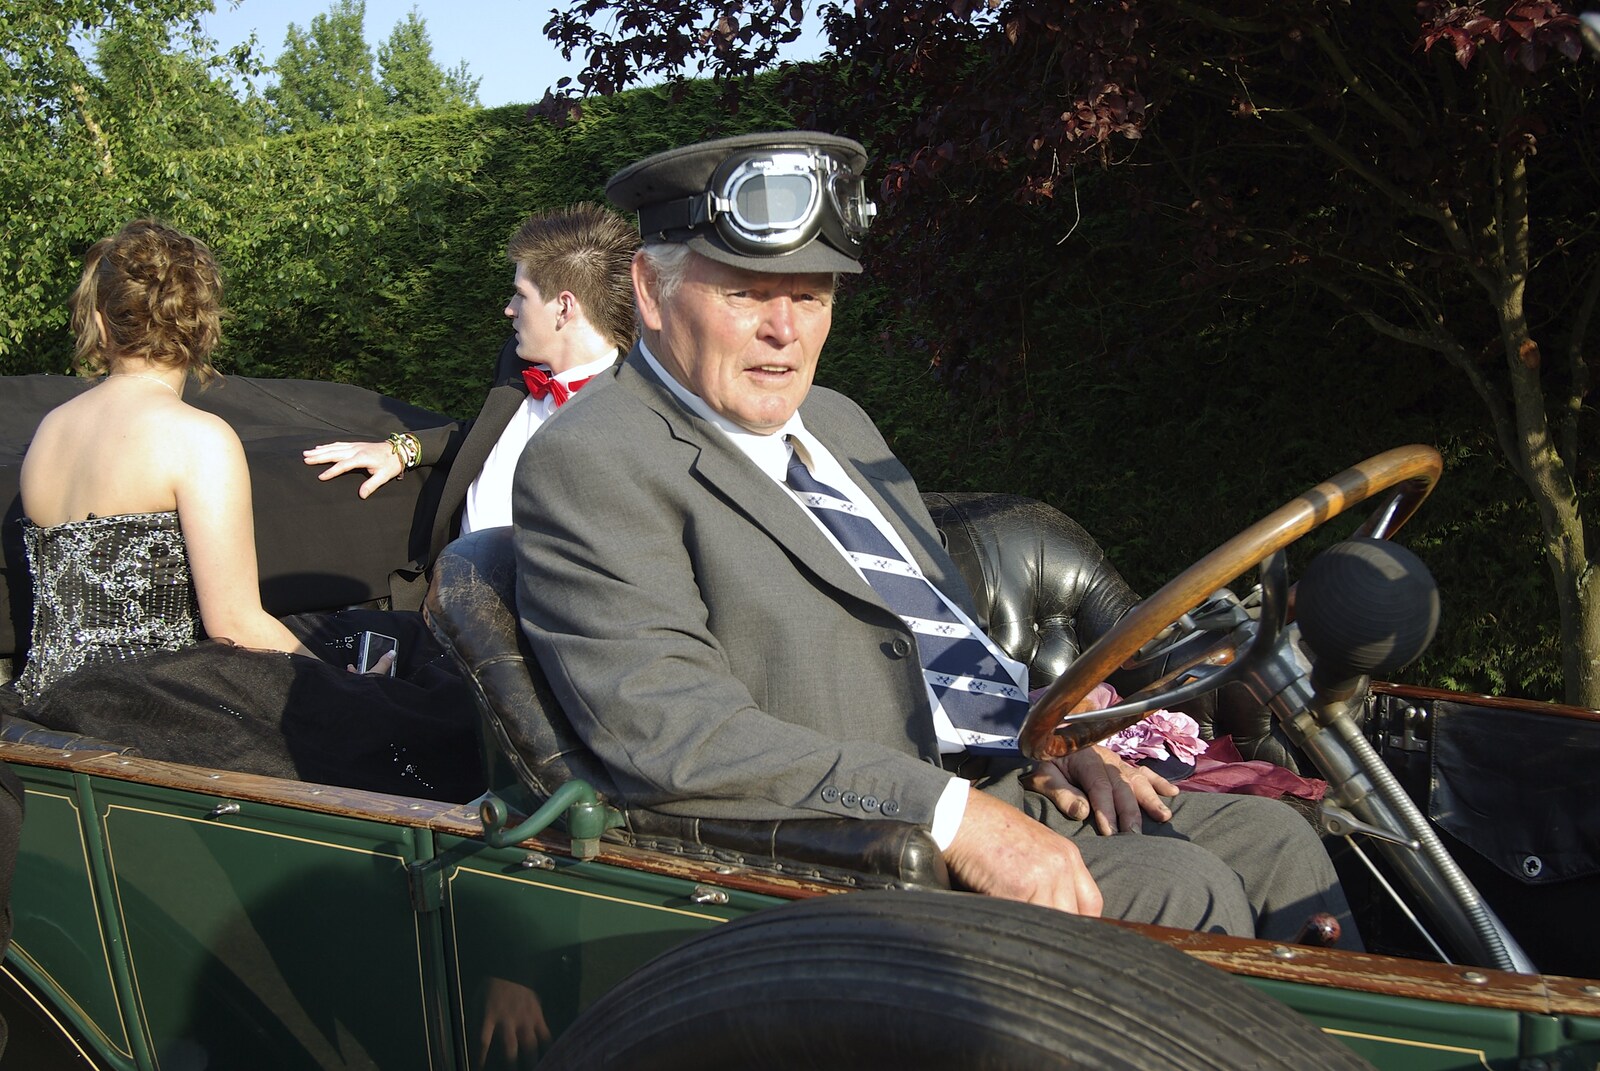 The BBs and Diss High School Leavers 07, Banham, Norfolk - 2nd June 2007: Jo's dad behind the wheel of the 1912 Cadillac